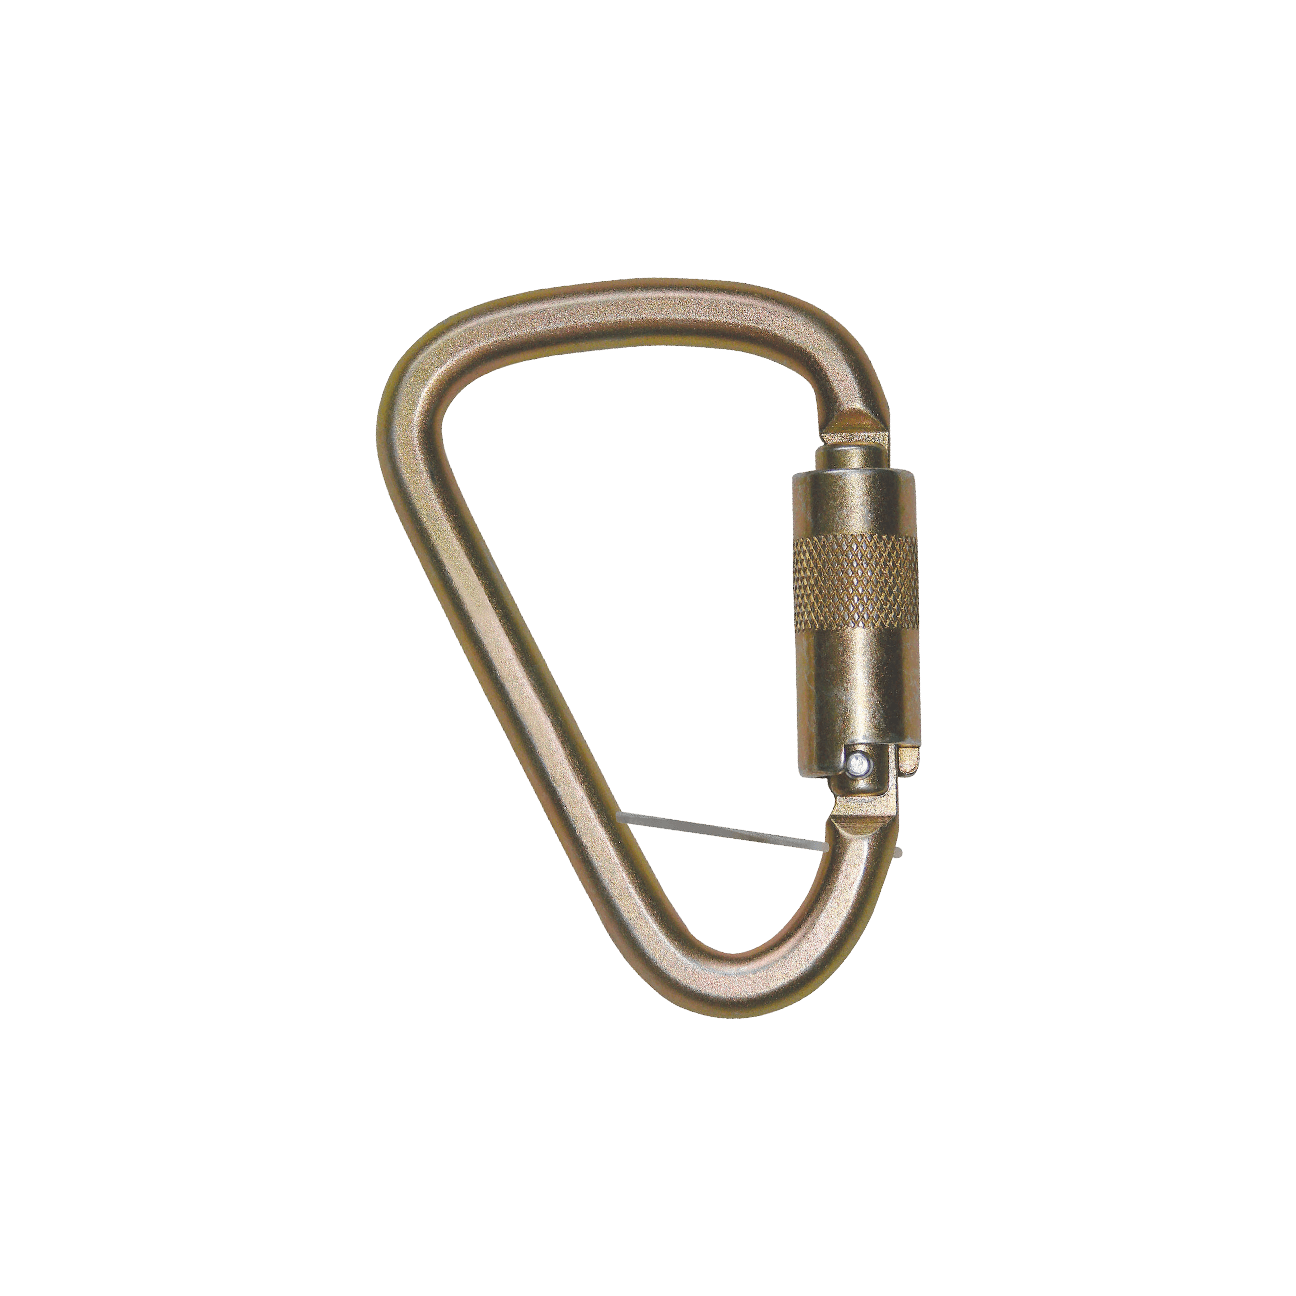 Alloy Steel Connecting Carabiner, 1" Open Gate Capacity